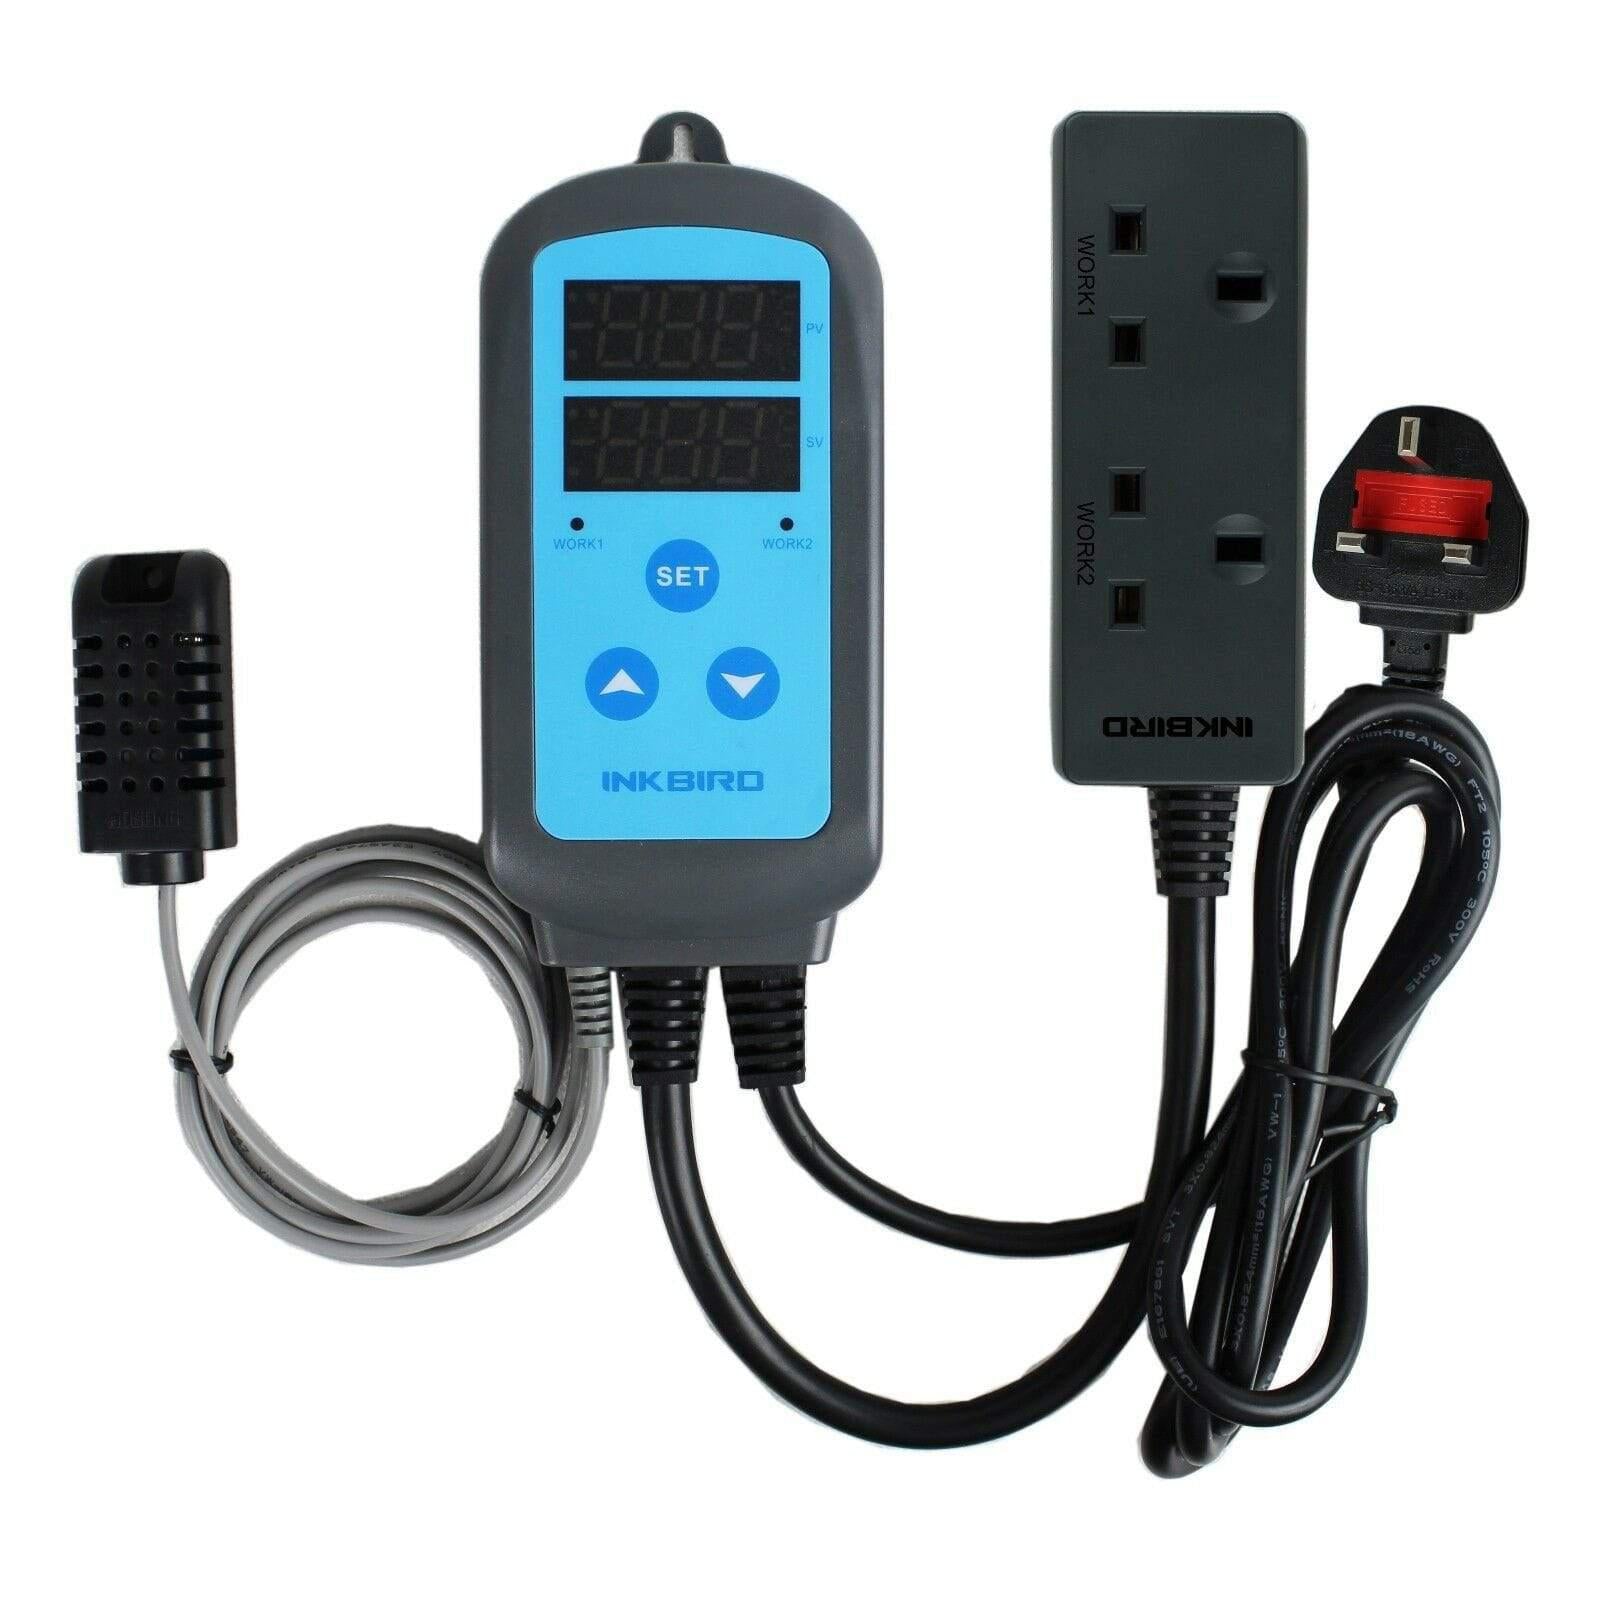 Inkbird Dual Outlet Pre-Wired Humidistat Humidity Controller IHC-200-WIFI US Plug Version / US Warehouse